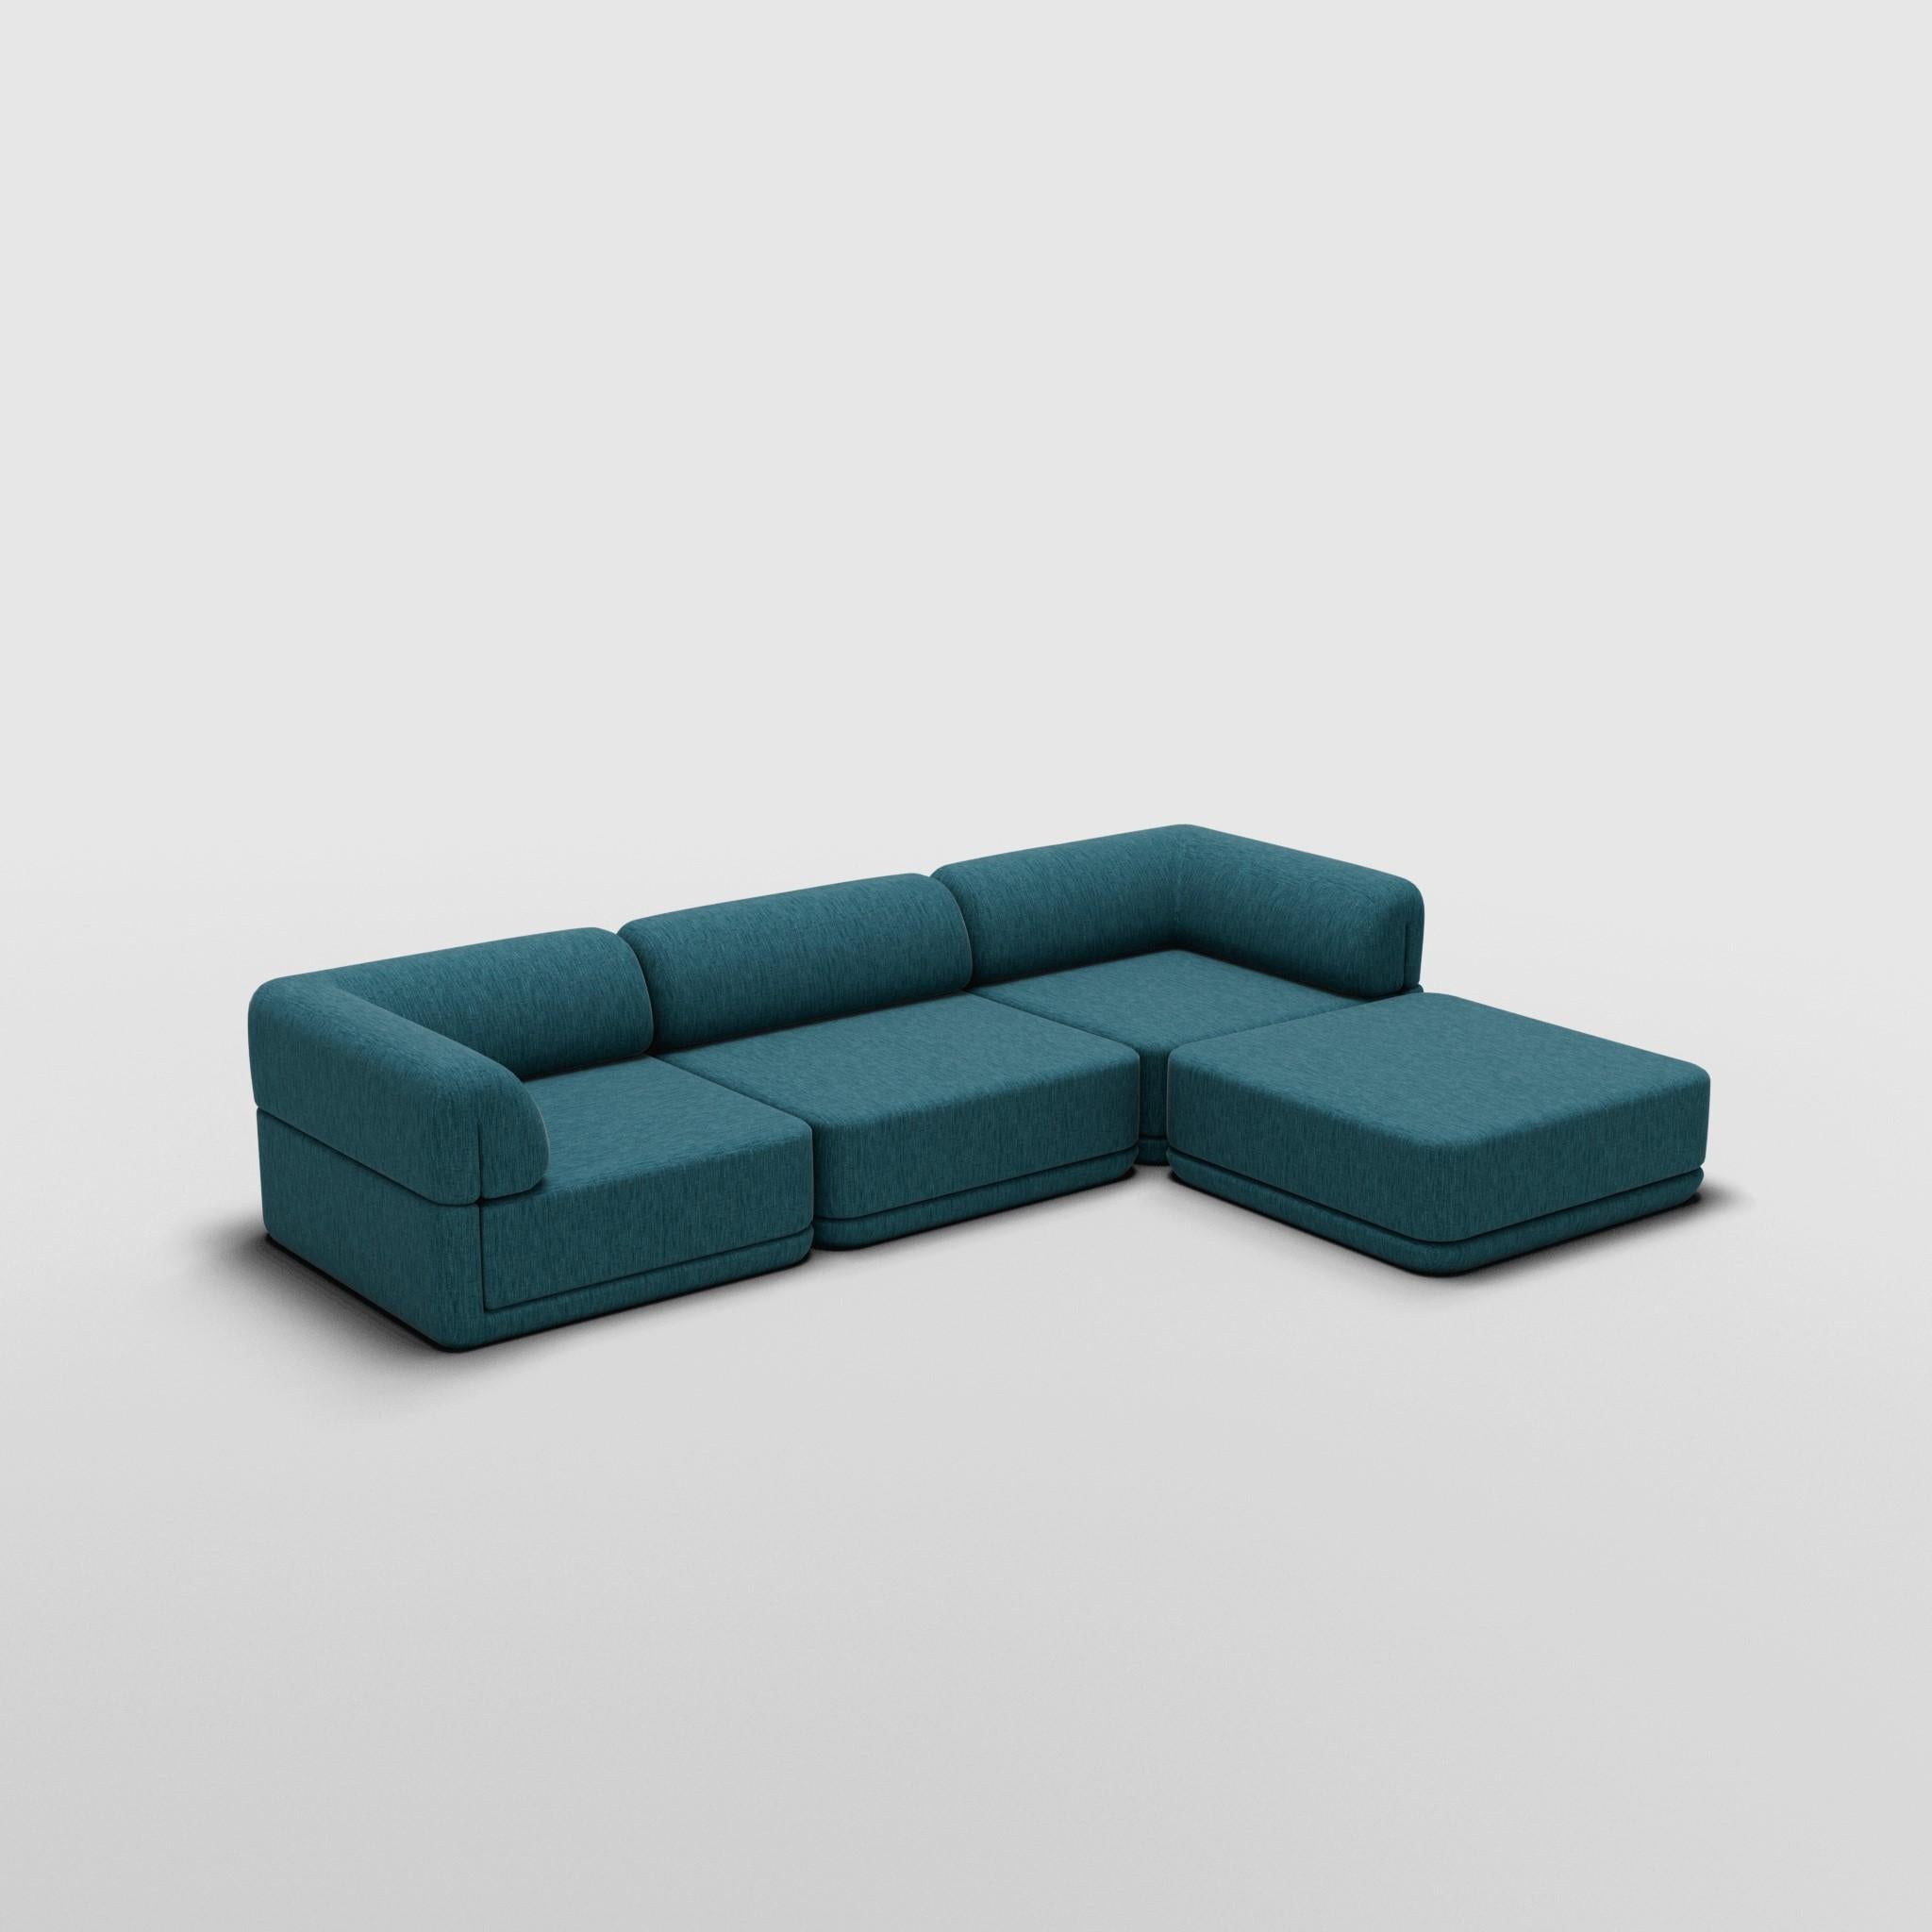 Sofa Lounge with Ottoman - Inspired by 70s Italian Luxury Furniture

Discover The Cube Sofa, where art meets adaptability. Its sculptural design and customizable comfort create endless possibilities for your living space. Make a statement, elevate